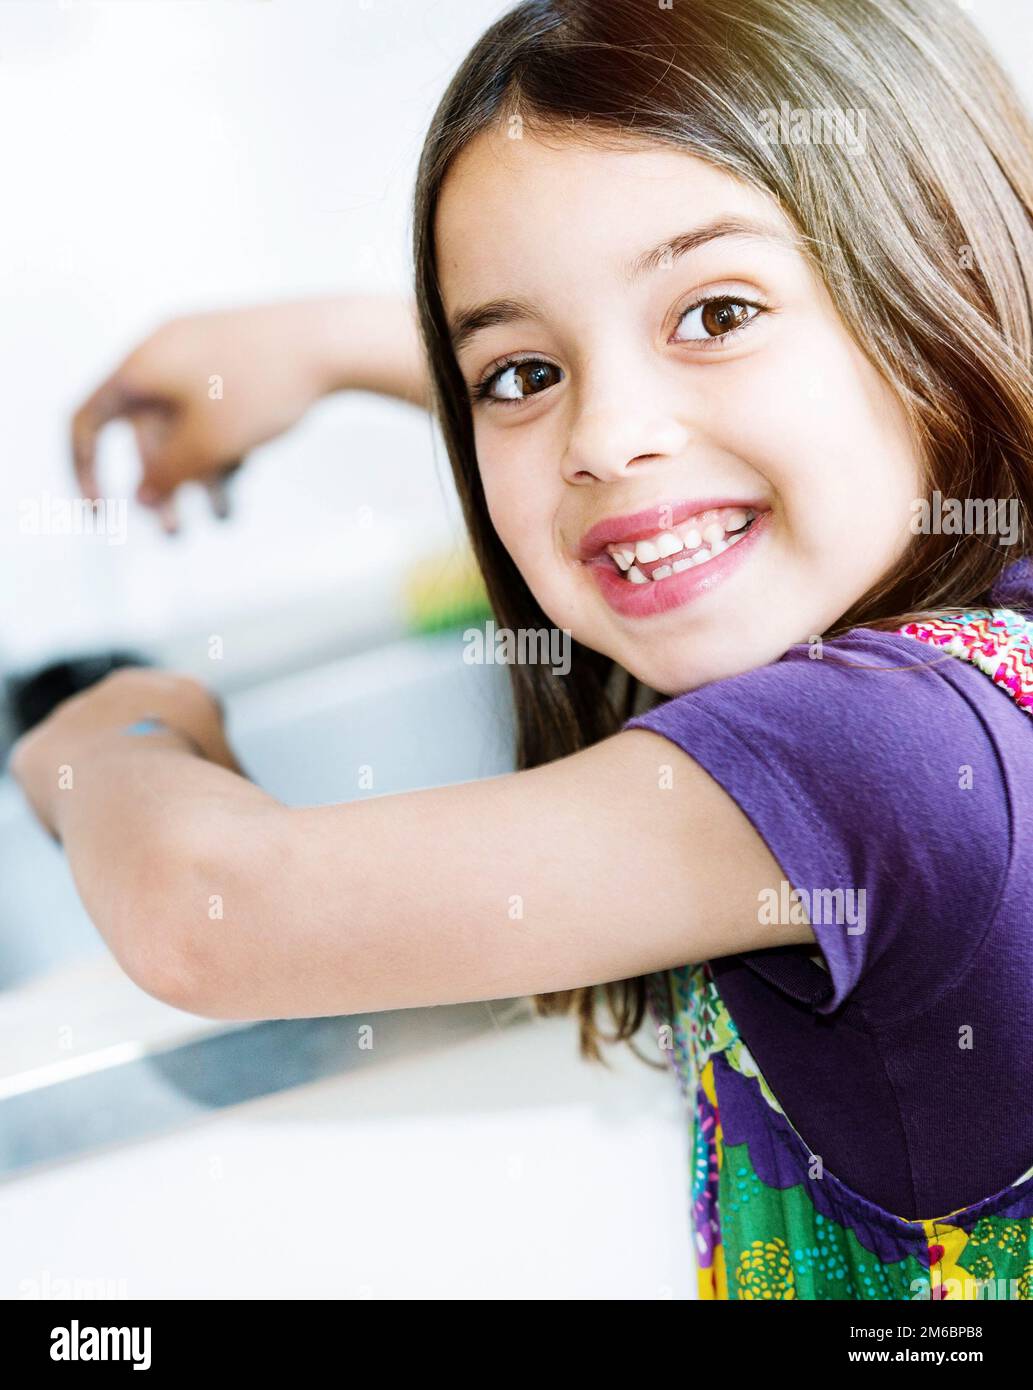 Kid washing hands in the kitchen Stock Photo